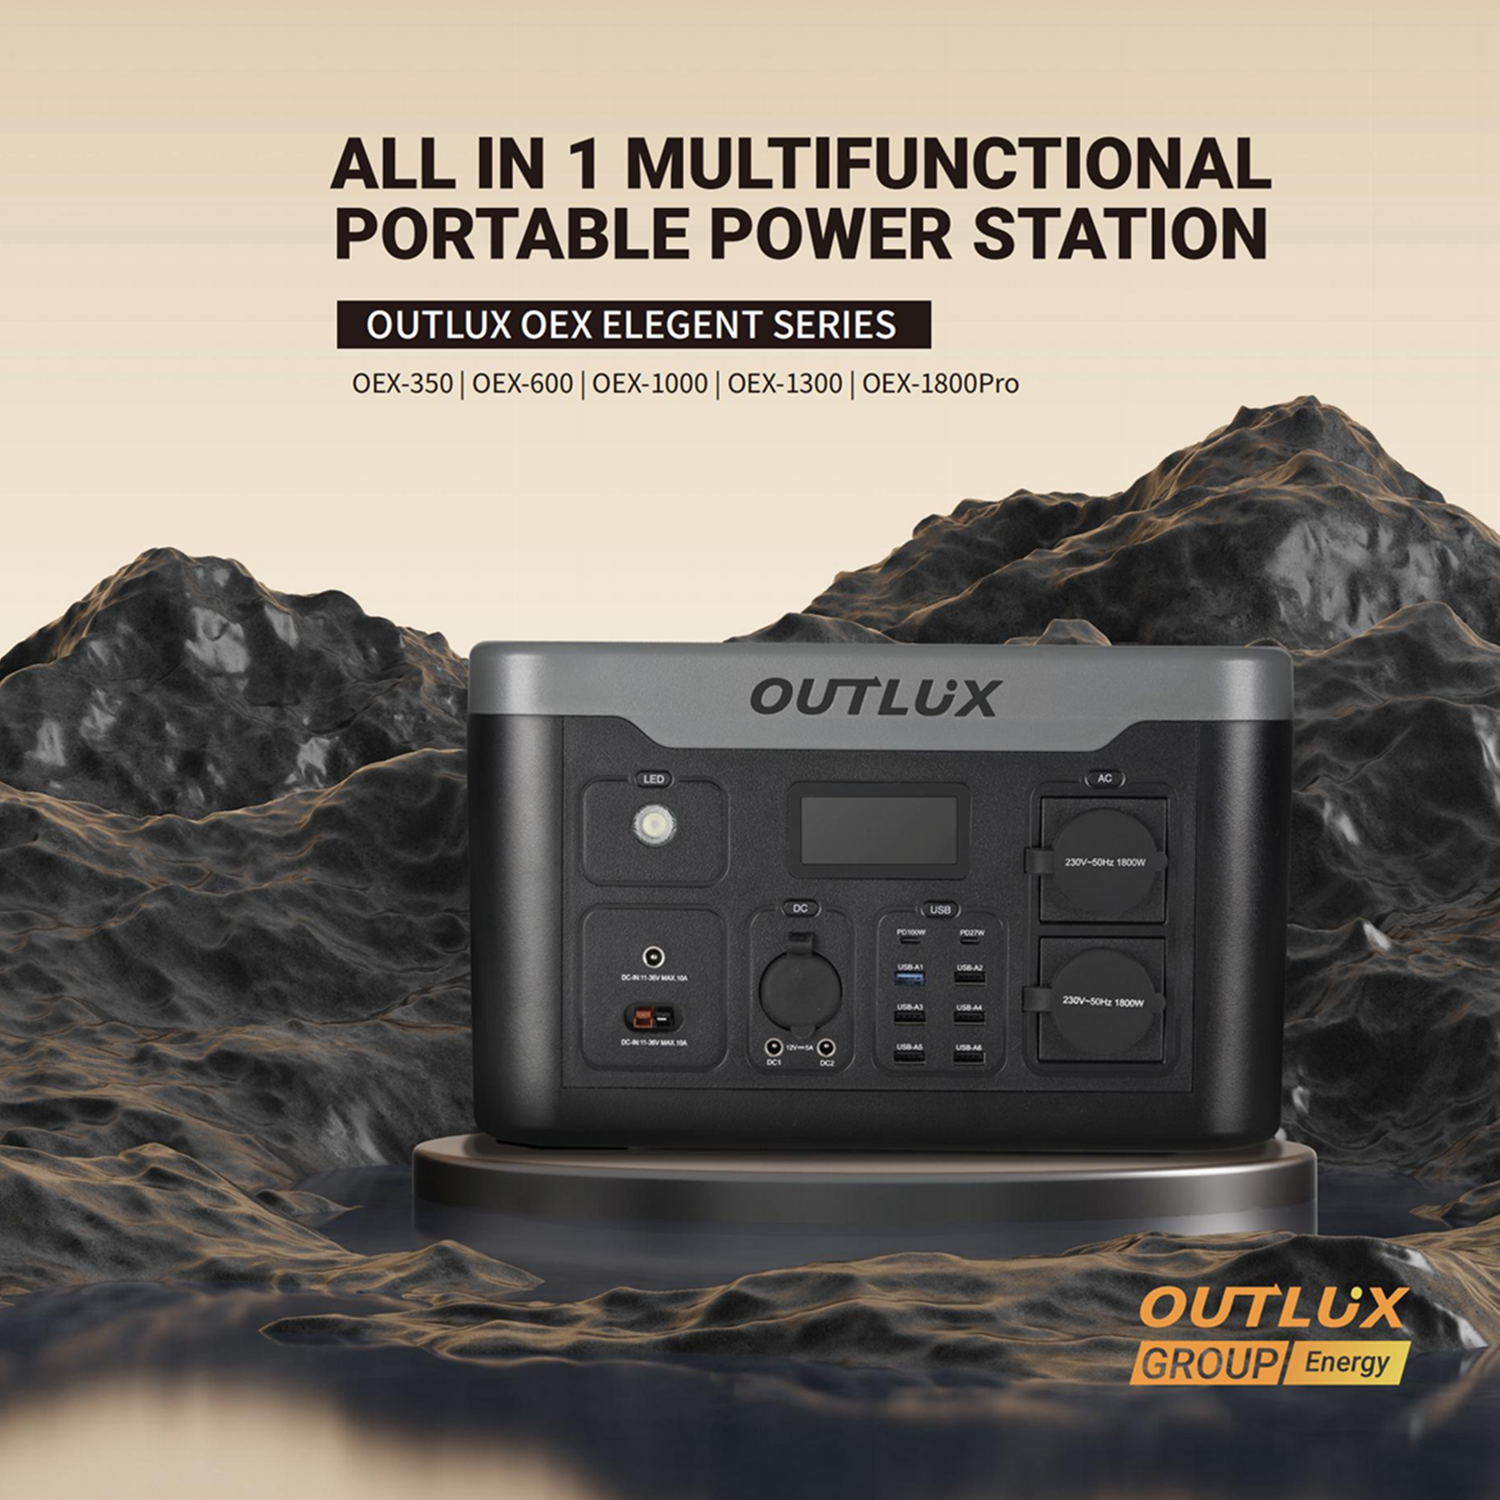 Outlux 350w Portable Power Station-Multifunctional